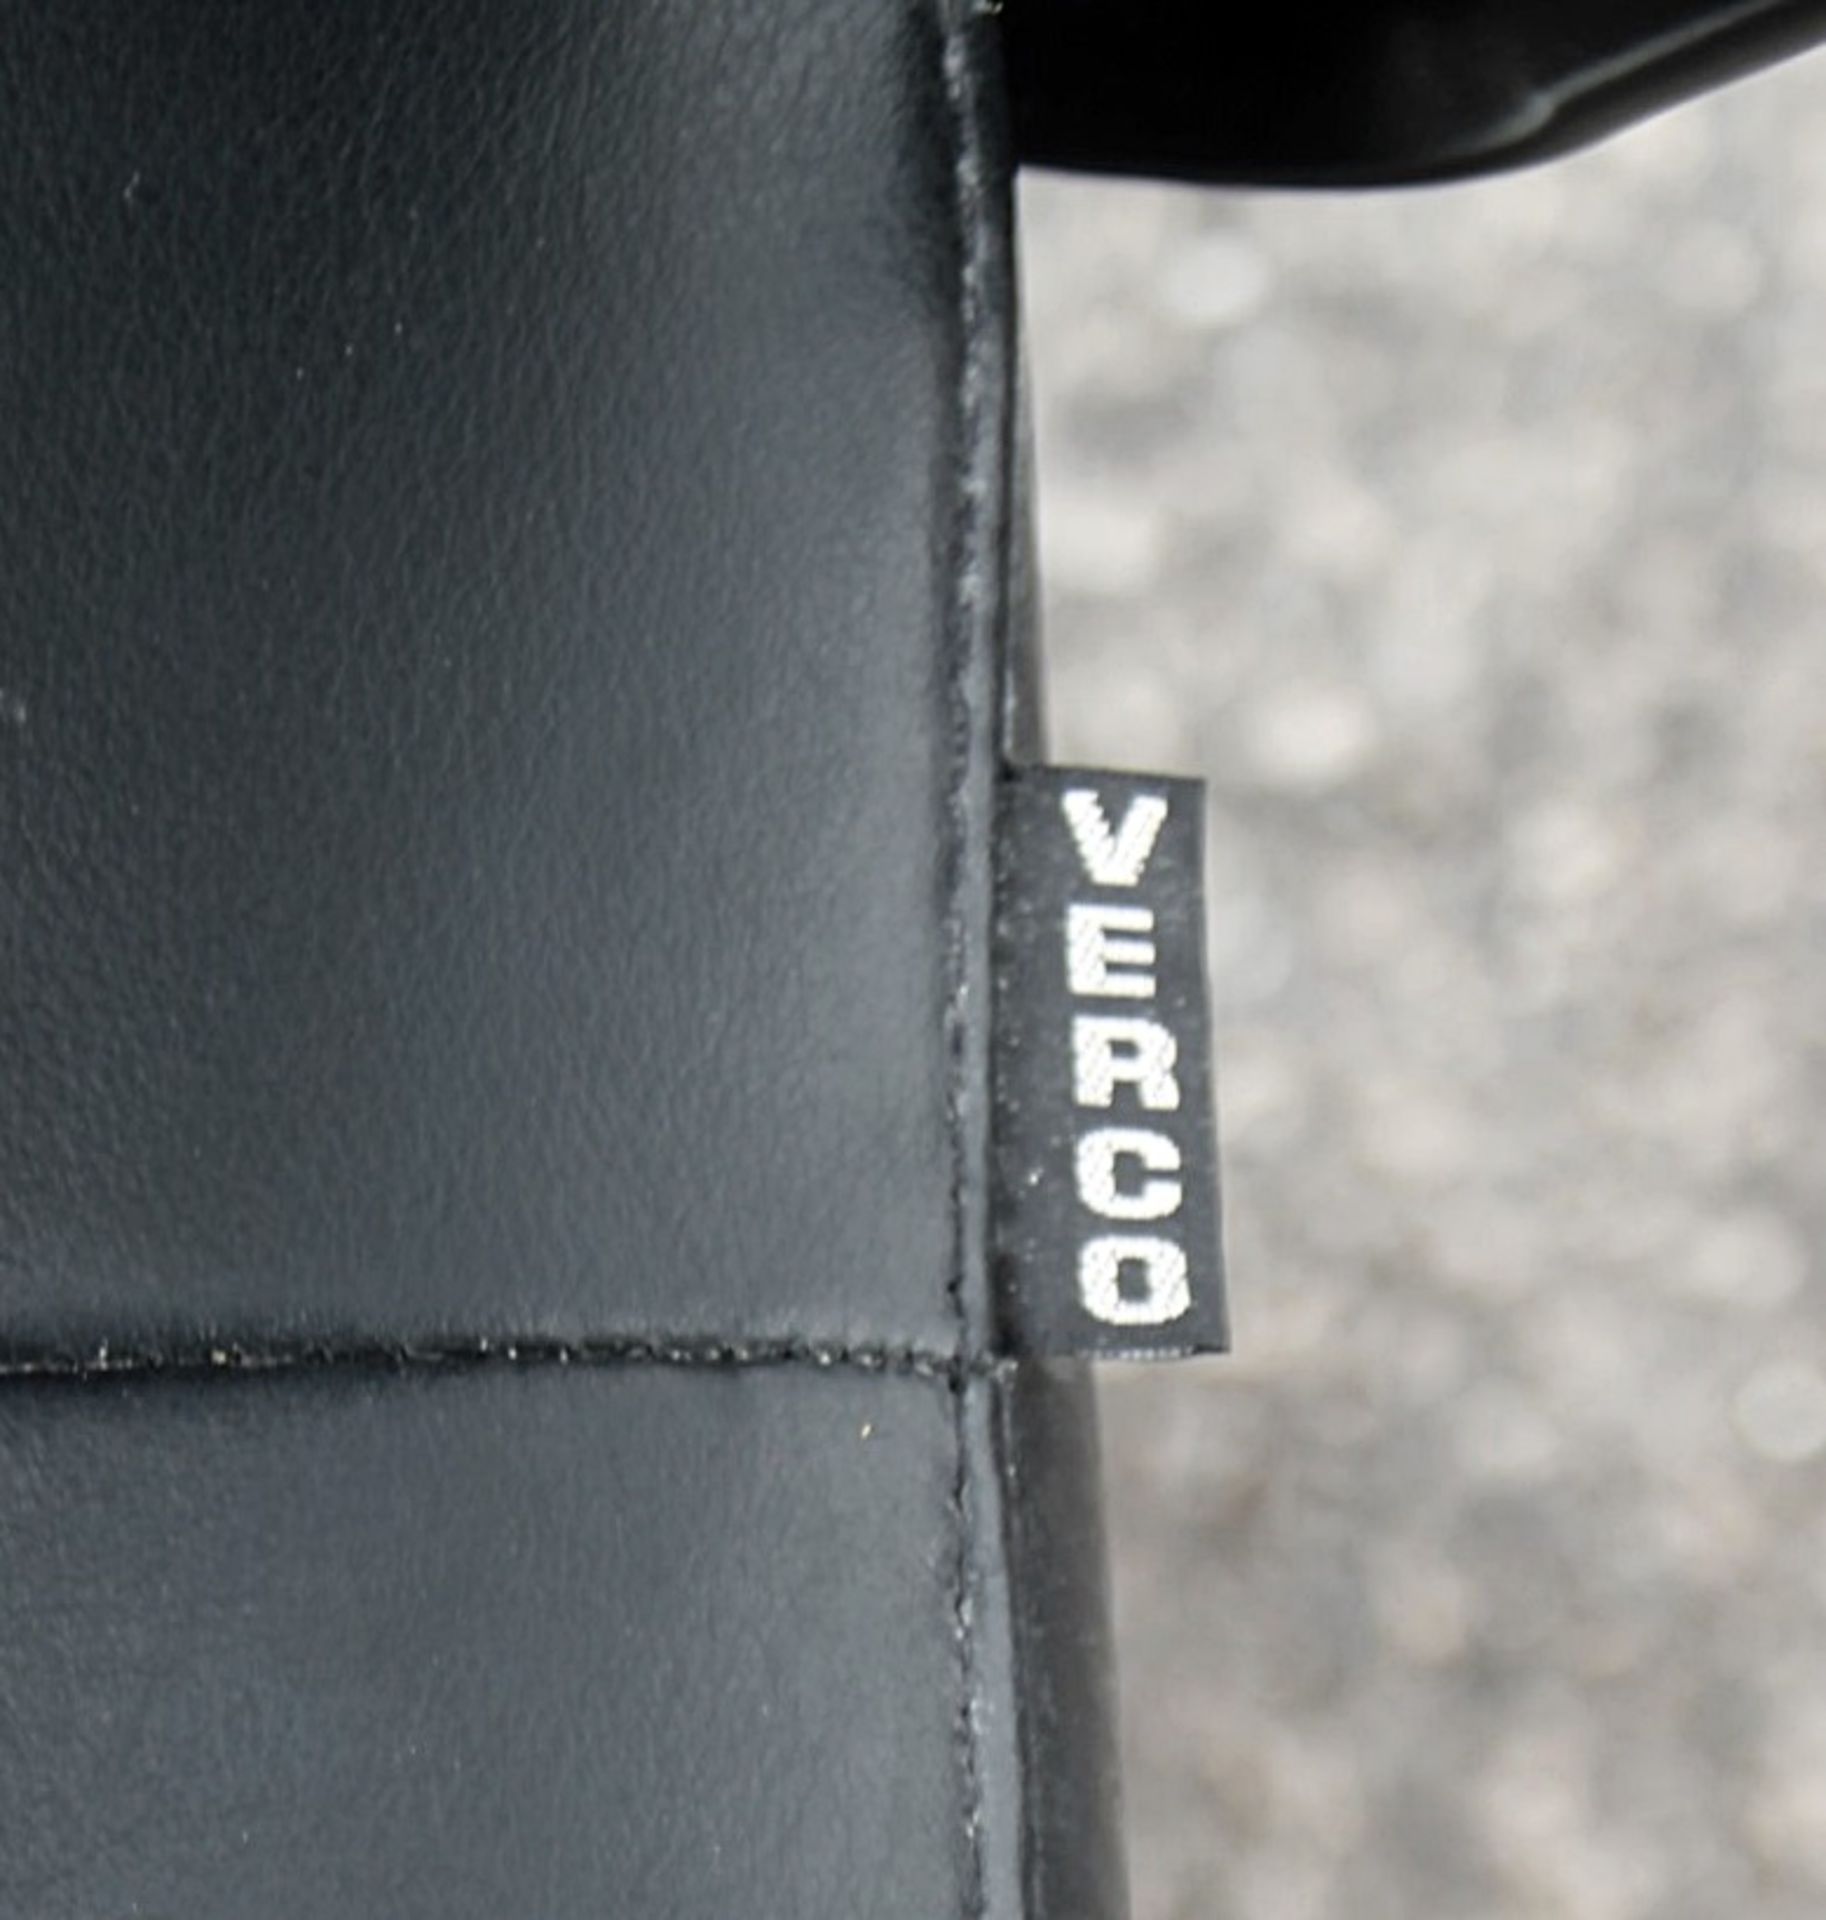 1 x VERCO Branded Gas Lift Swivel Chair Upholstered In A Black Faux Leather - Removed From An - Image 2 of 5